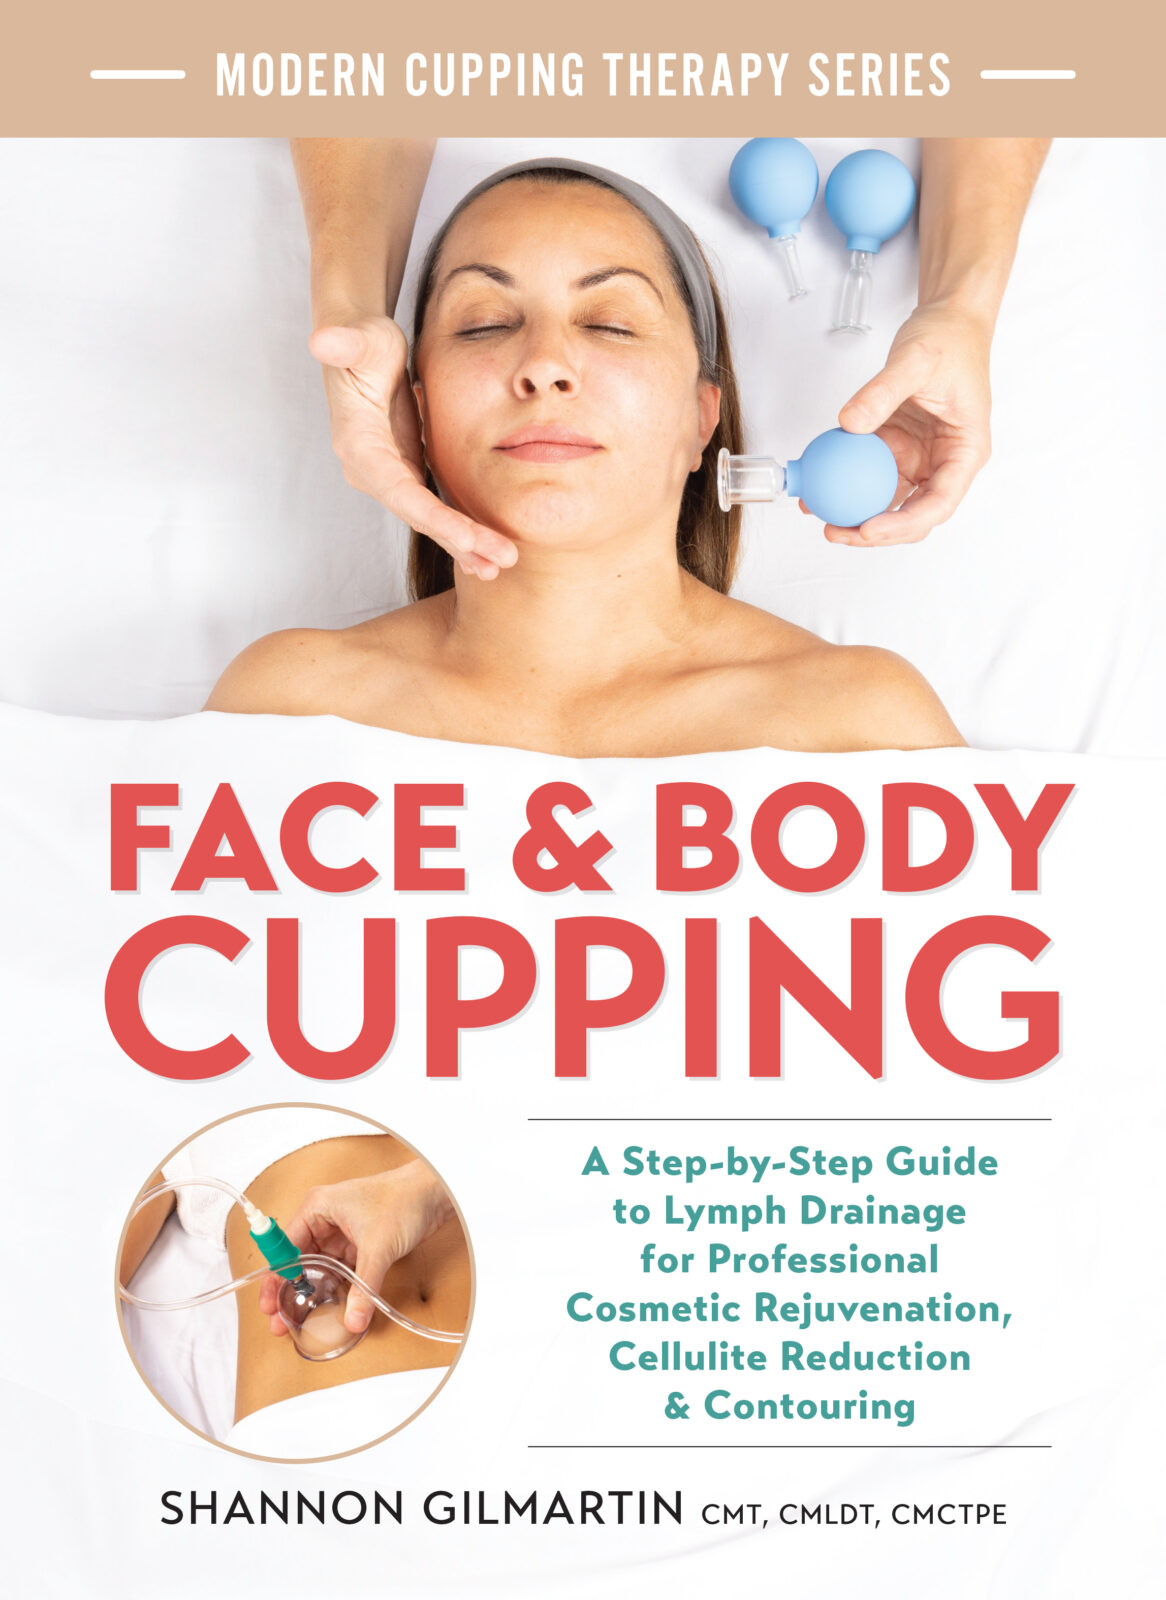 Body Contouring  Lymphatic Drainage, Post-op Manual Lymphatic Drainage, Body  Contouring, Cupping, Bodywork, Facial Cupping